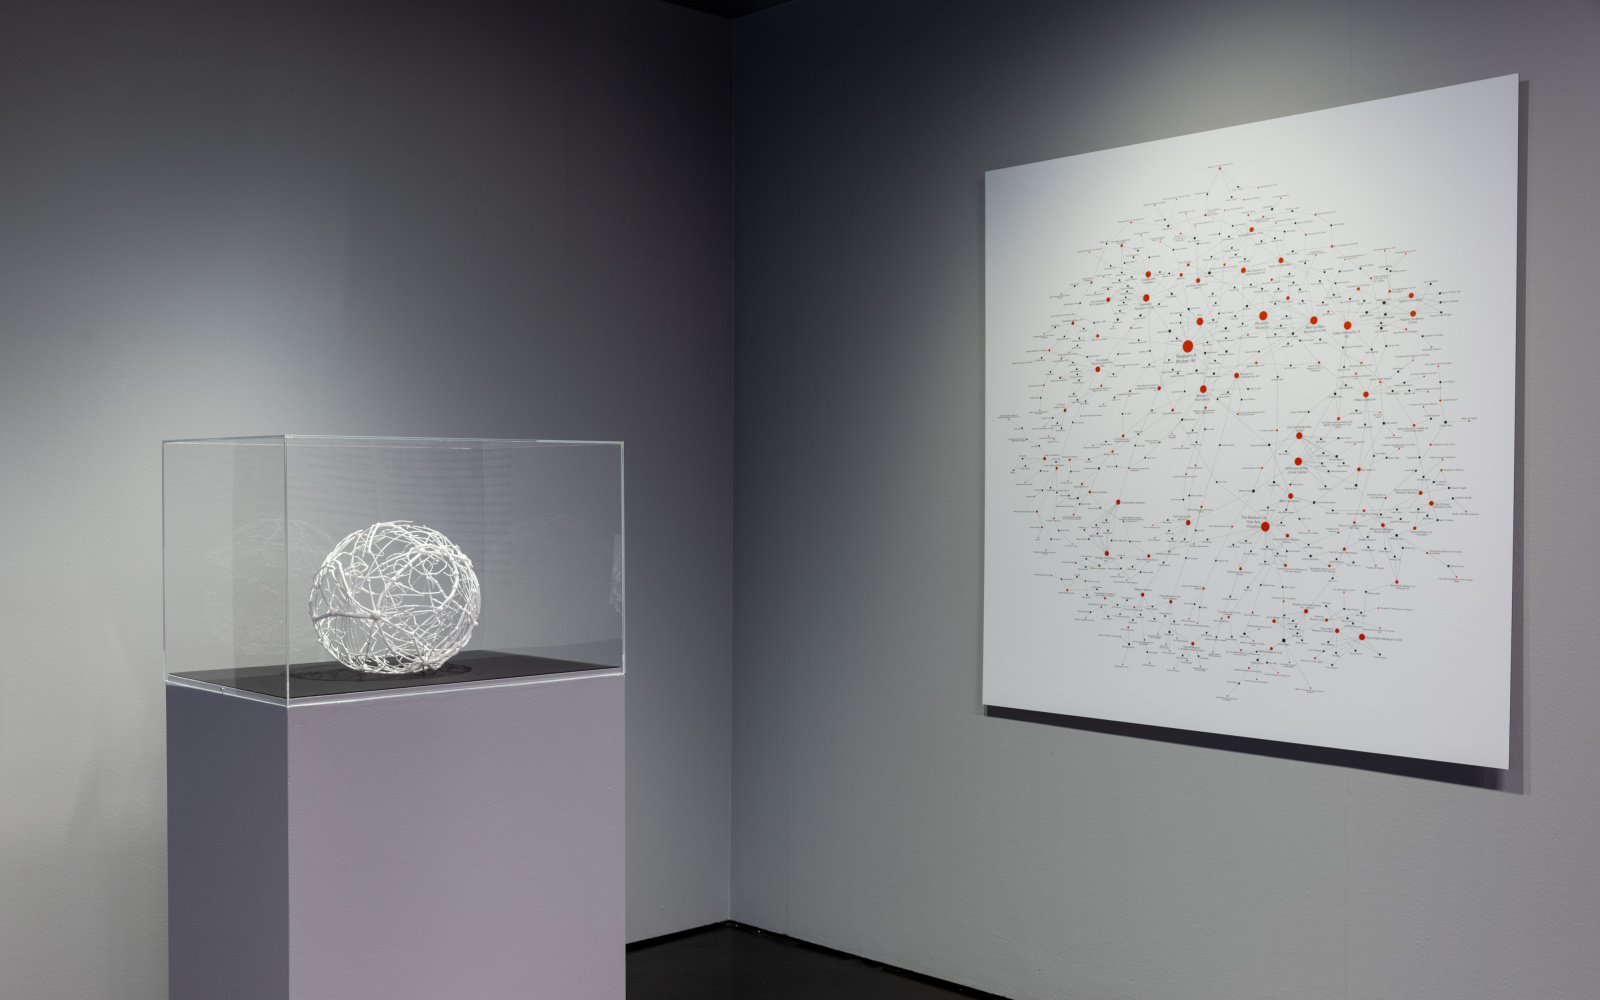 Exhibition view with the »Art Board Network« as a 3D model and as a picture on the wall.